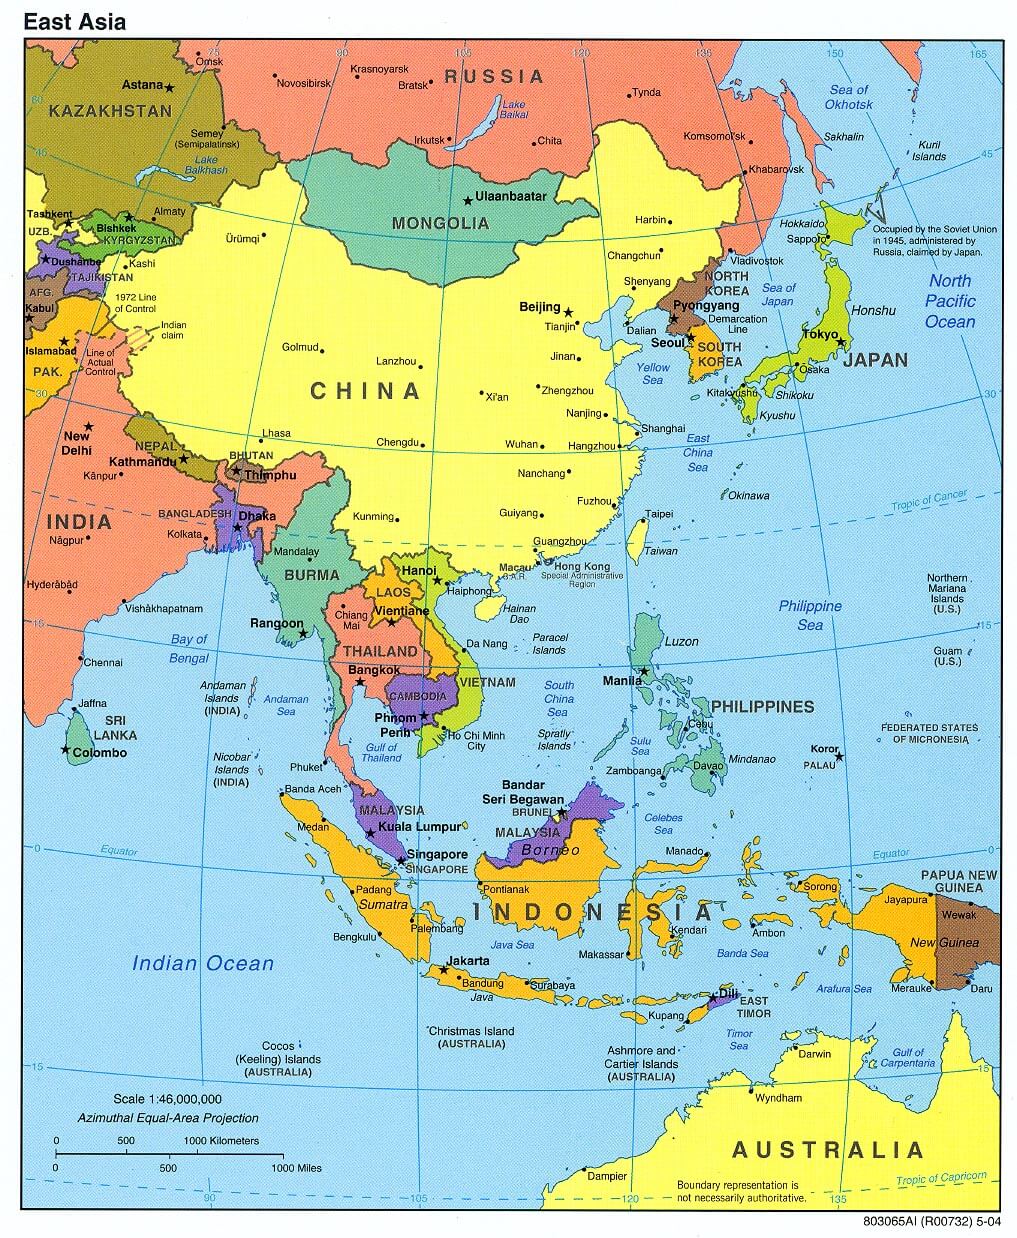 east asia political map 2004